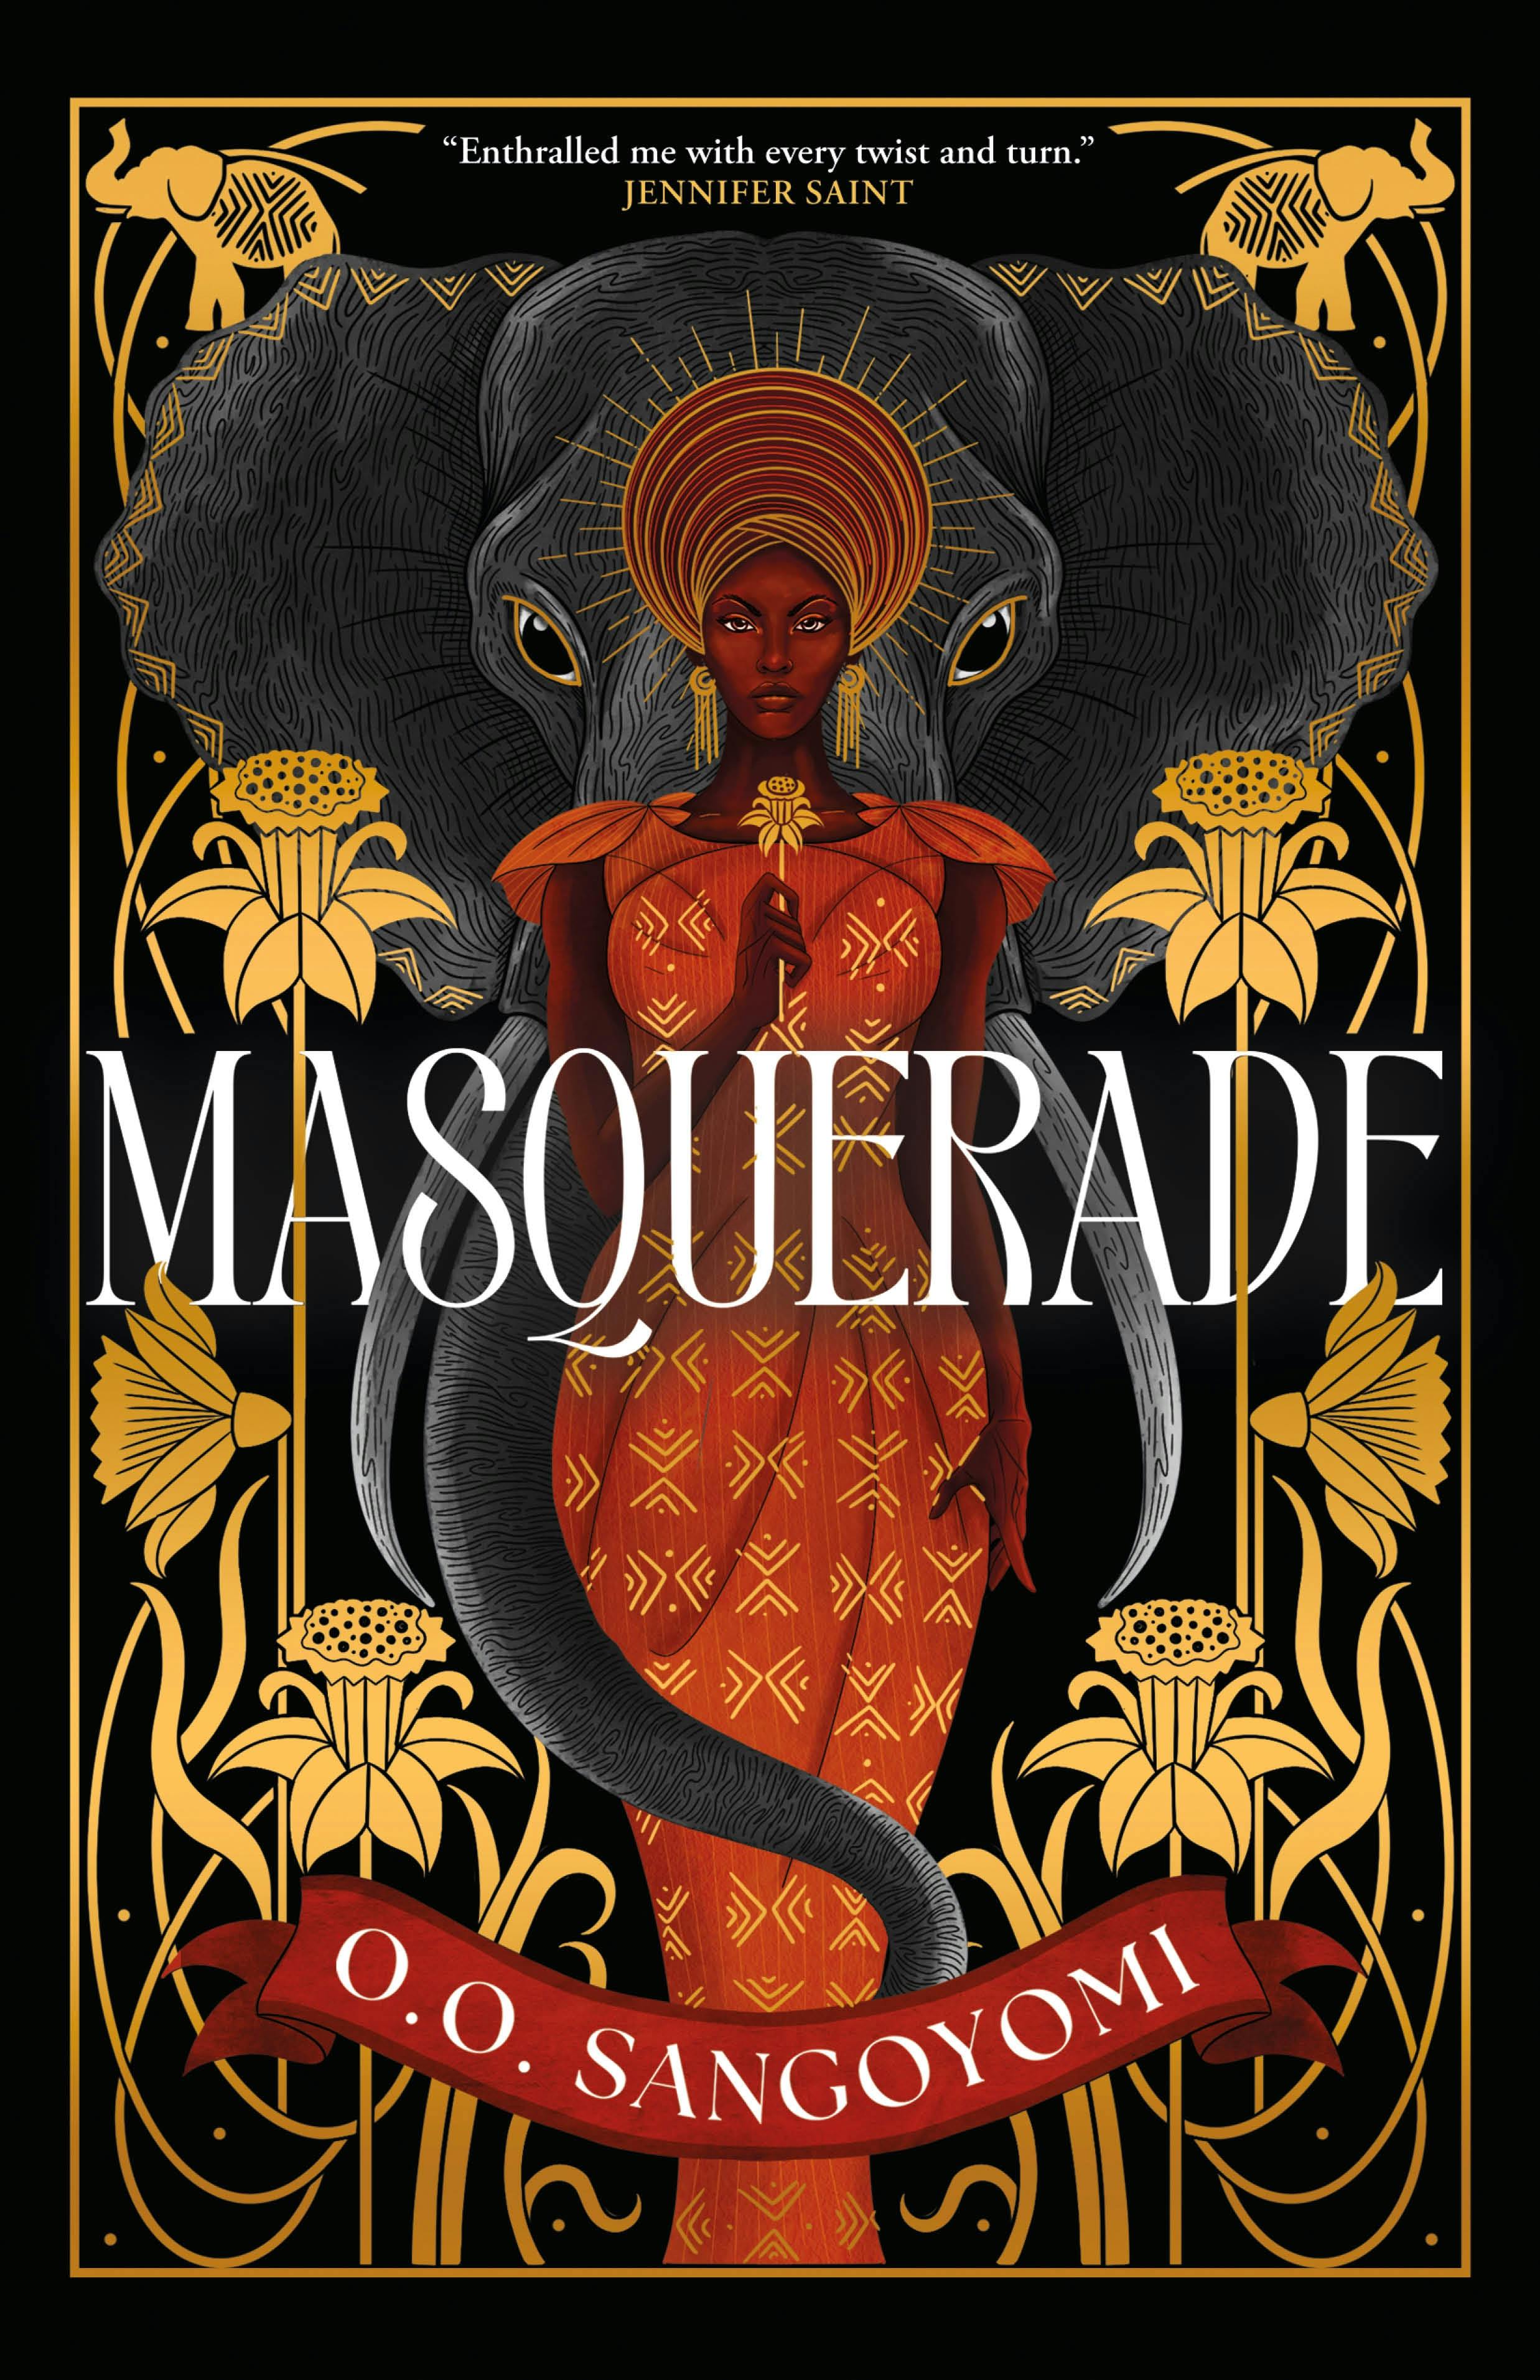 Cover for the book titled as: Masquerade